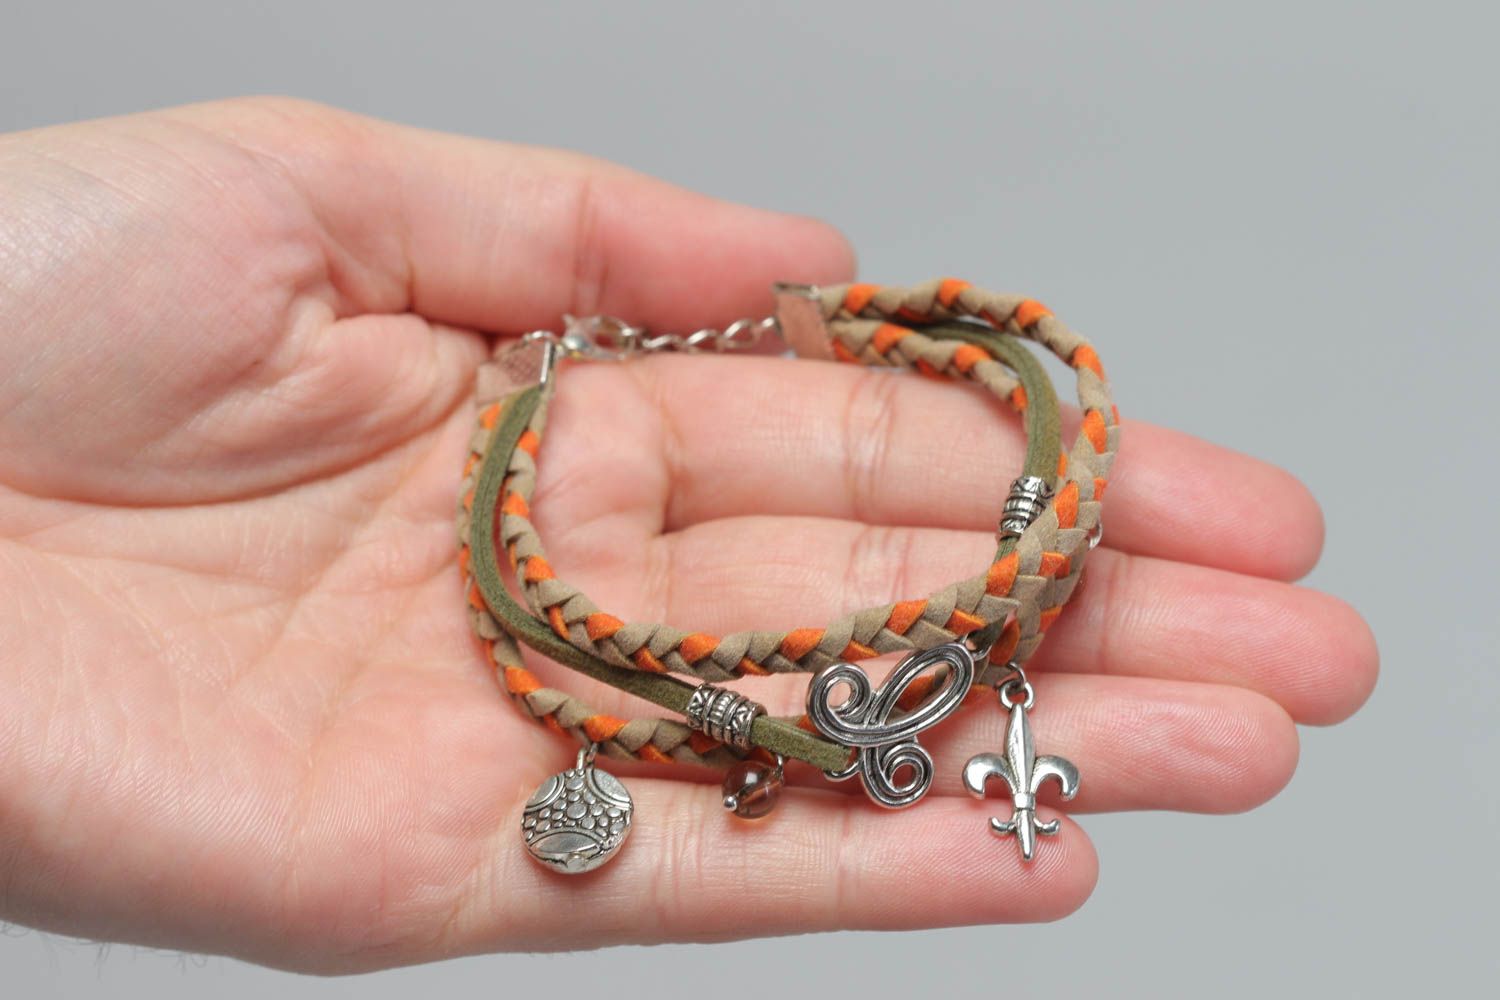 Handmade braided leather bracelet with metal charms fashion jewelry gift ideas photo 5